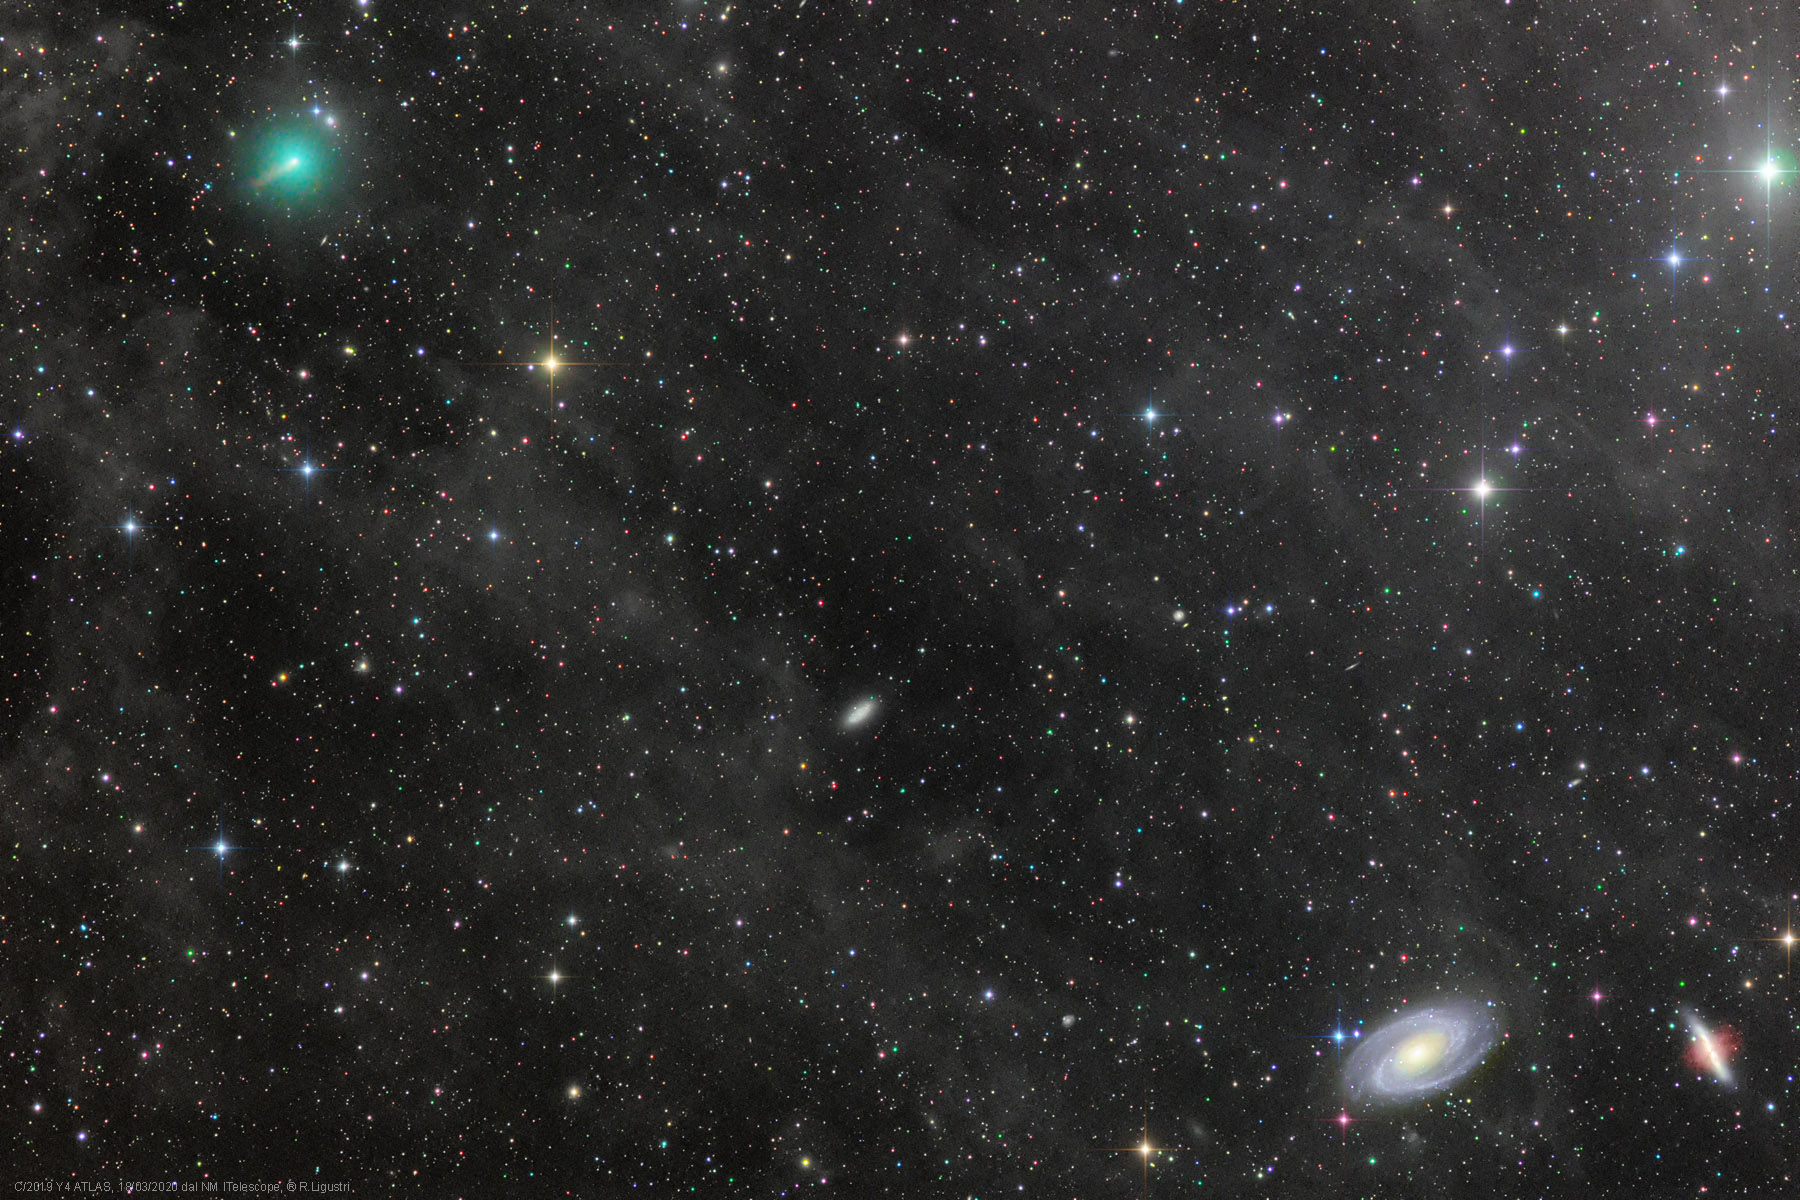 Apod March 21 Comet Atlas And The Mighty Galaxies